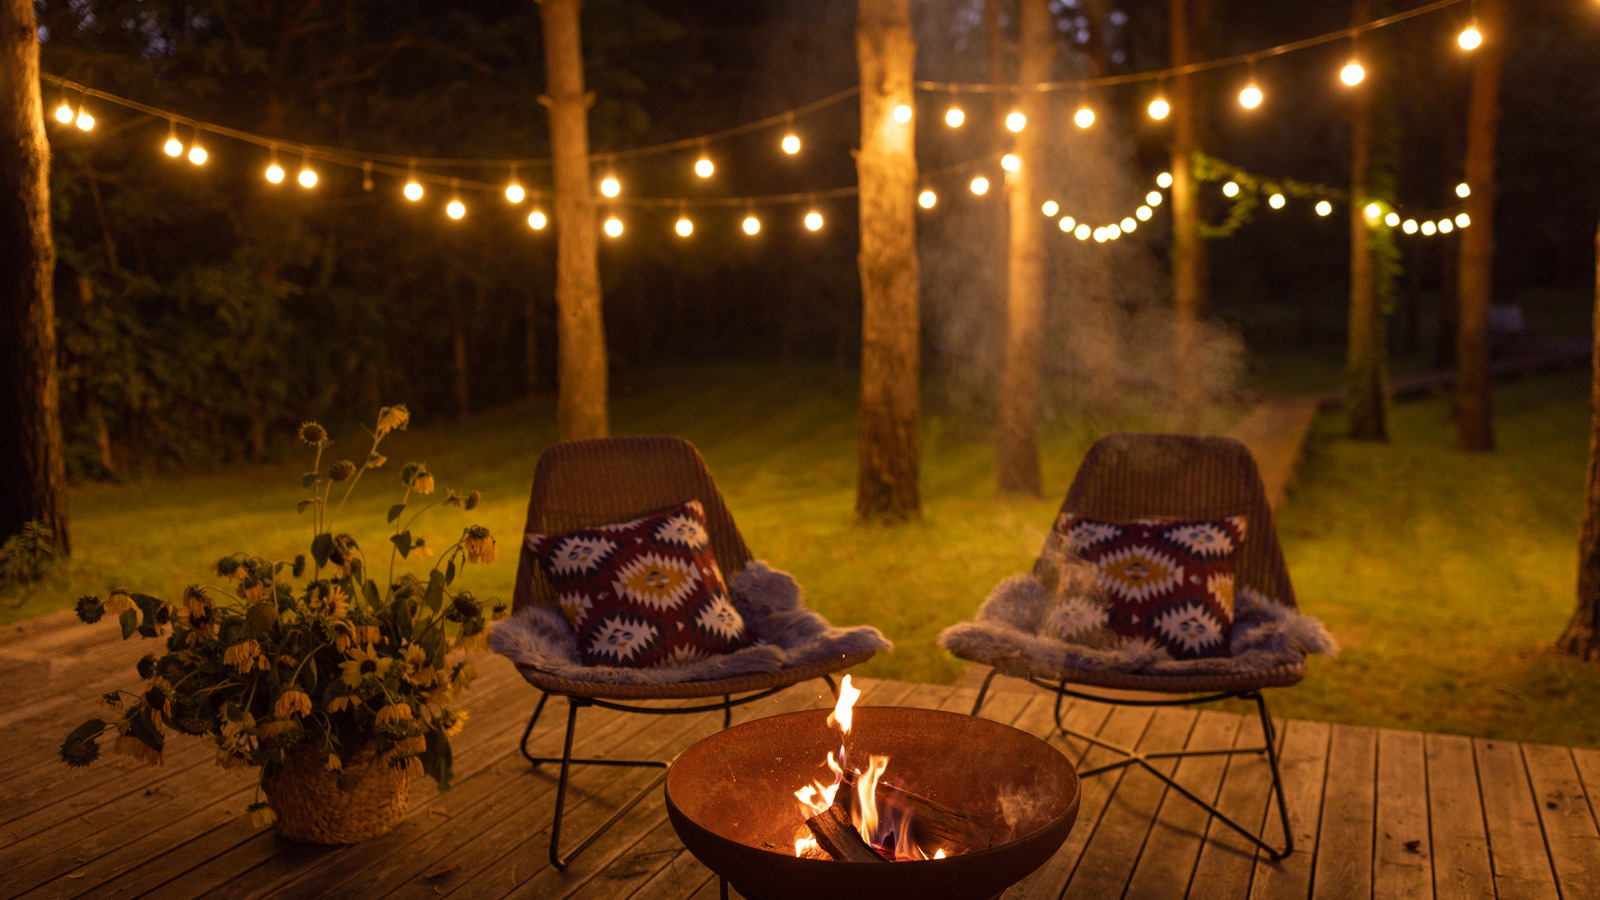 These DIY String Light Poles Will Brighten Up Any Patio